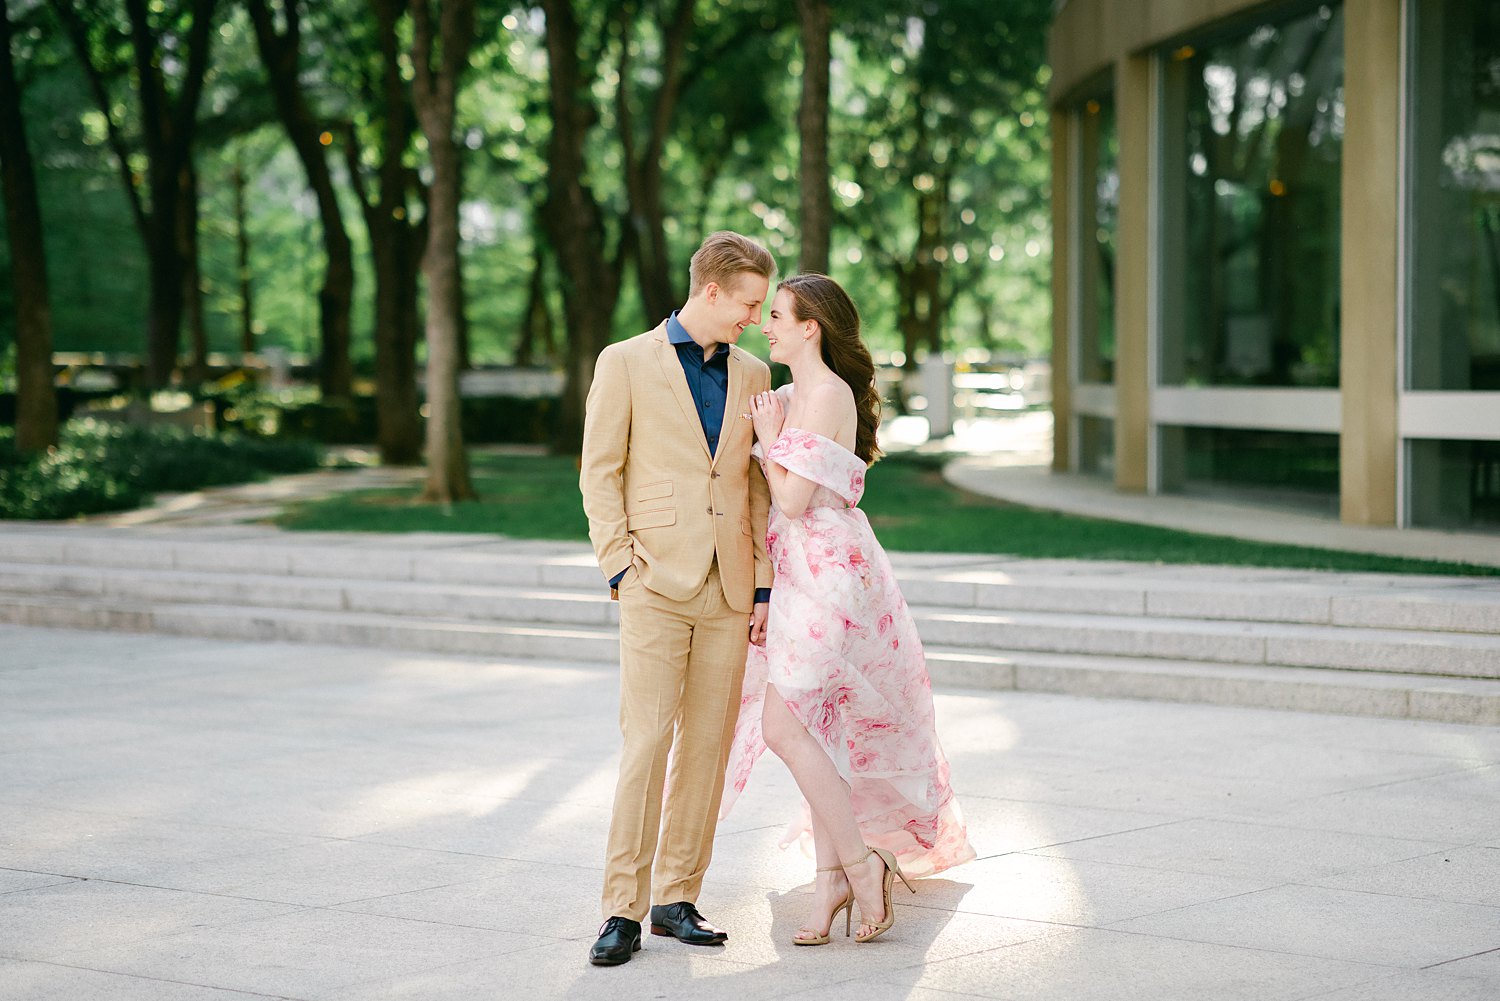 Laughing woman in Pink floral gown arm around man in tan suite and blue shirt